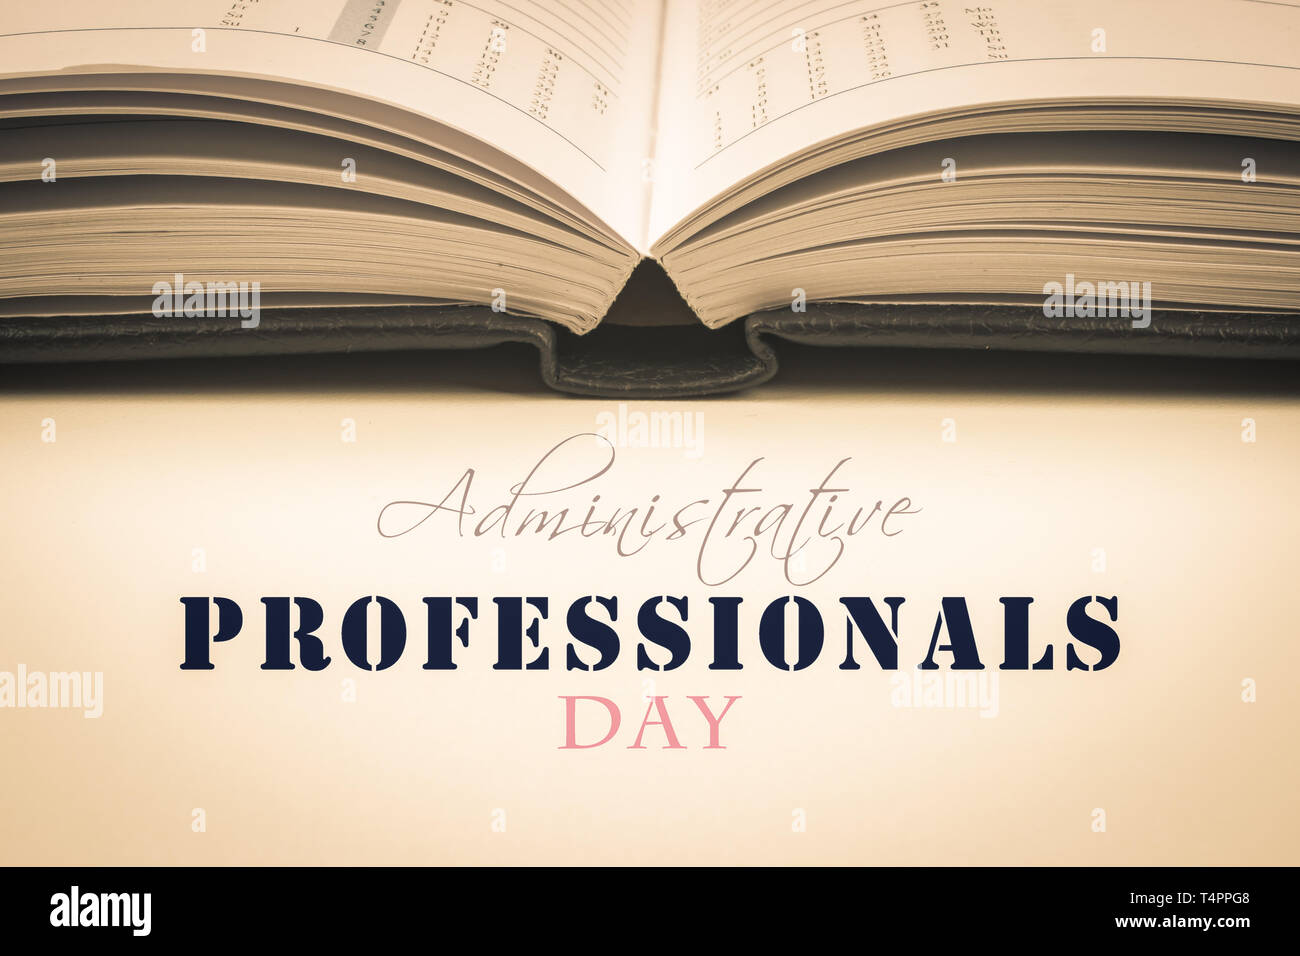 Administrative Professionals Day text Karte mit offenen Tagesordnung. Vintage Style. Stockfoto